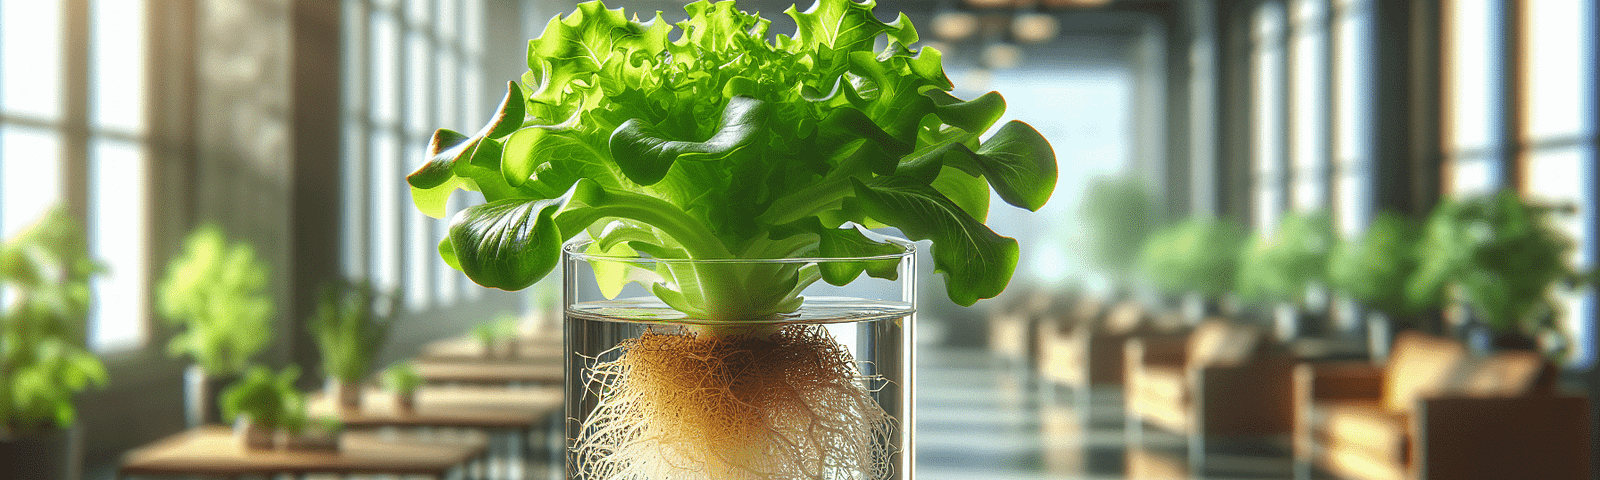 Understanding the Kratky Method in Hydroponics: A Friendly Guide to Growing Without Fuss